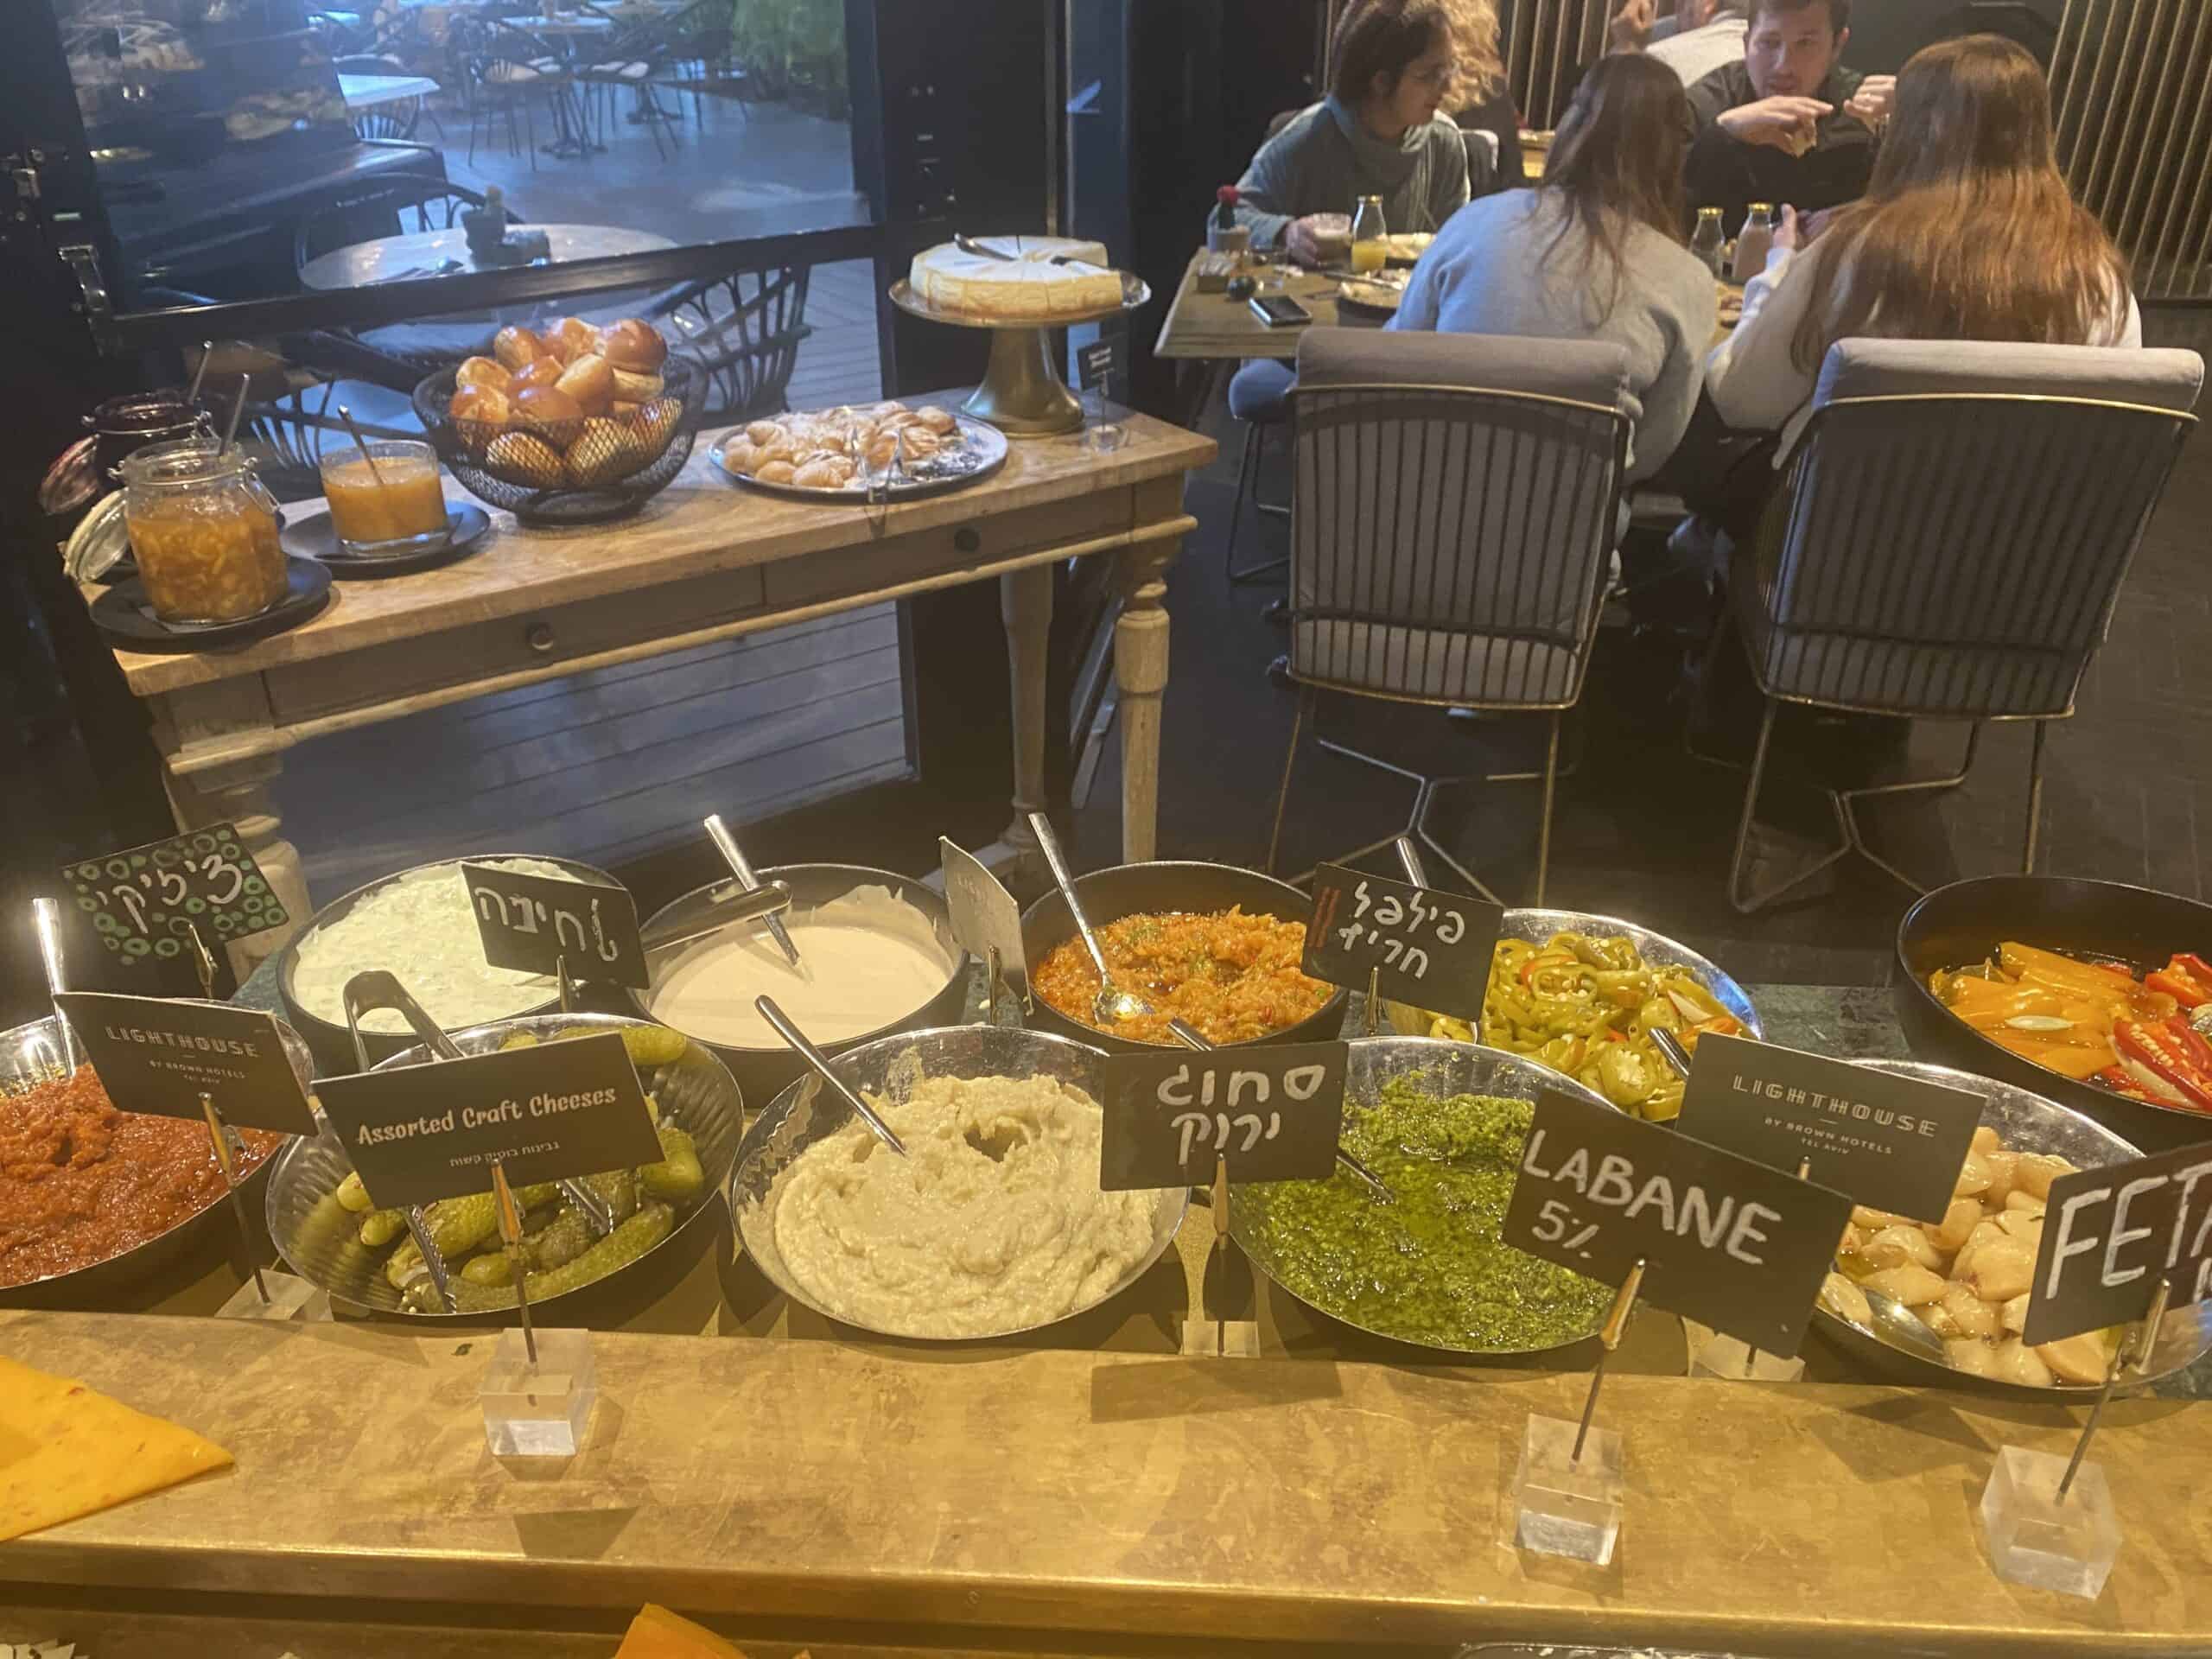 A photo of an Israeli breakfast buffet with signs in Hebrew.